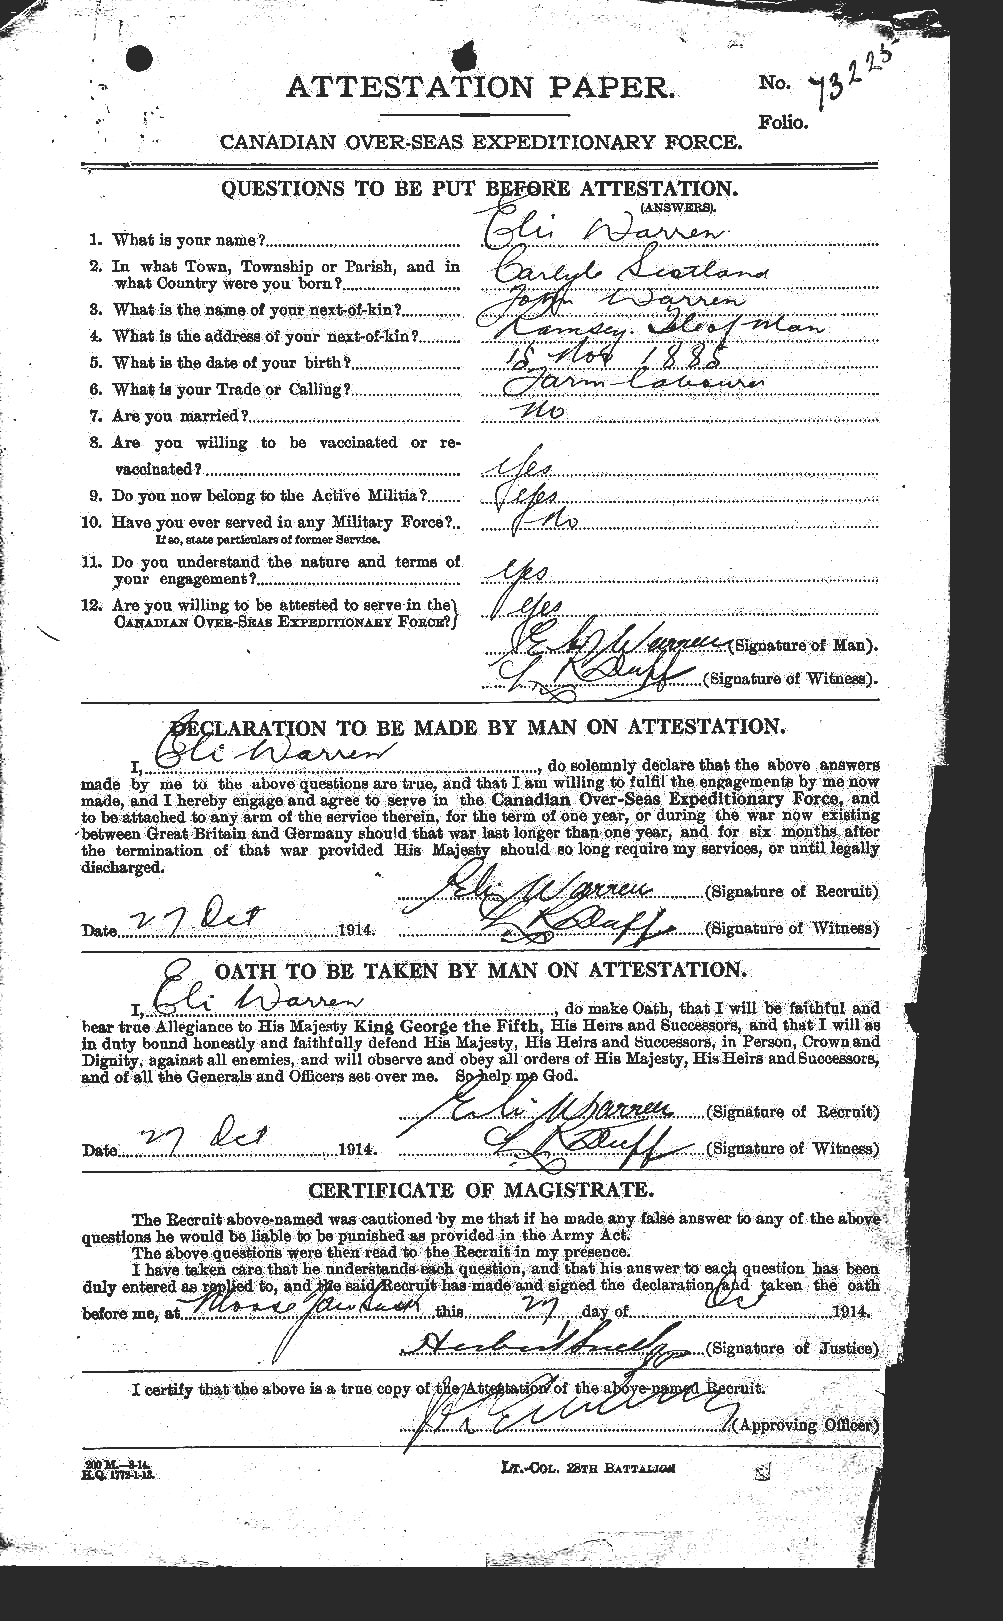 Personnel Records of the First World War - CEF 658419a